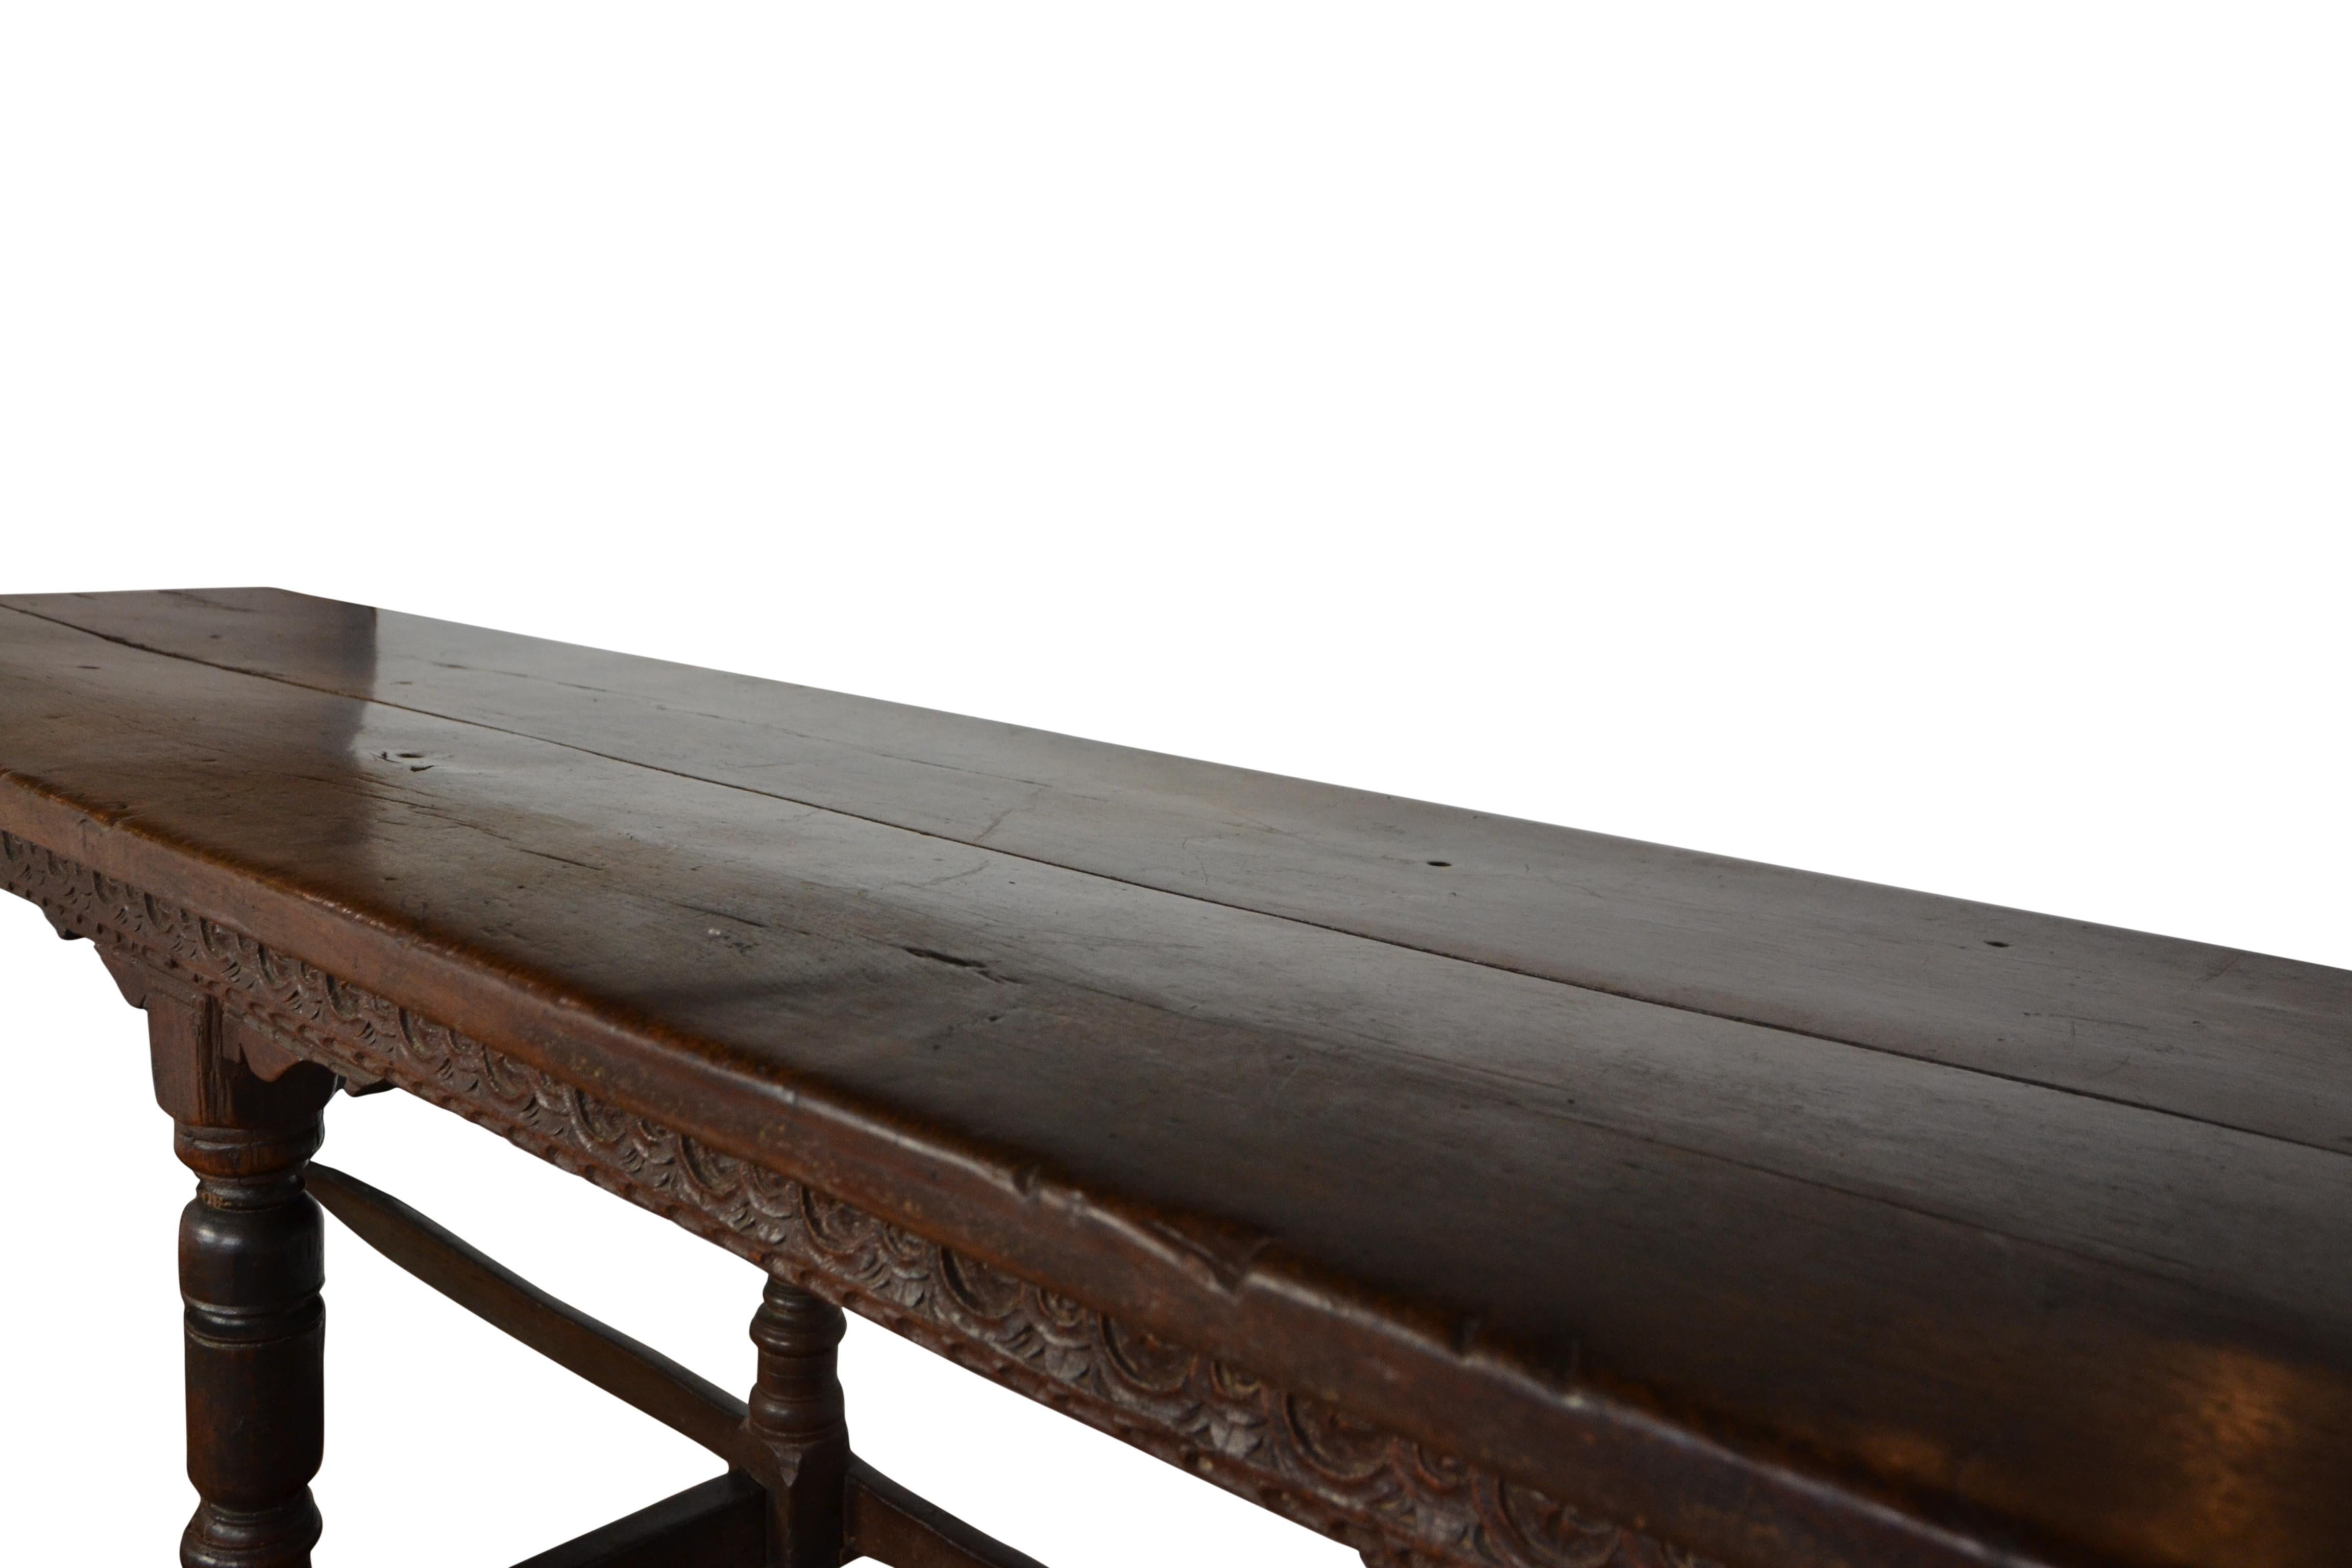 A large English oak refectory table, circa 1680. Carved frieze to one long side, turned legs. Table has original finish and nice patina.